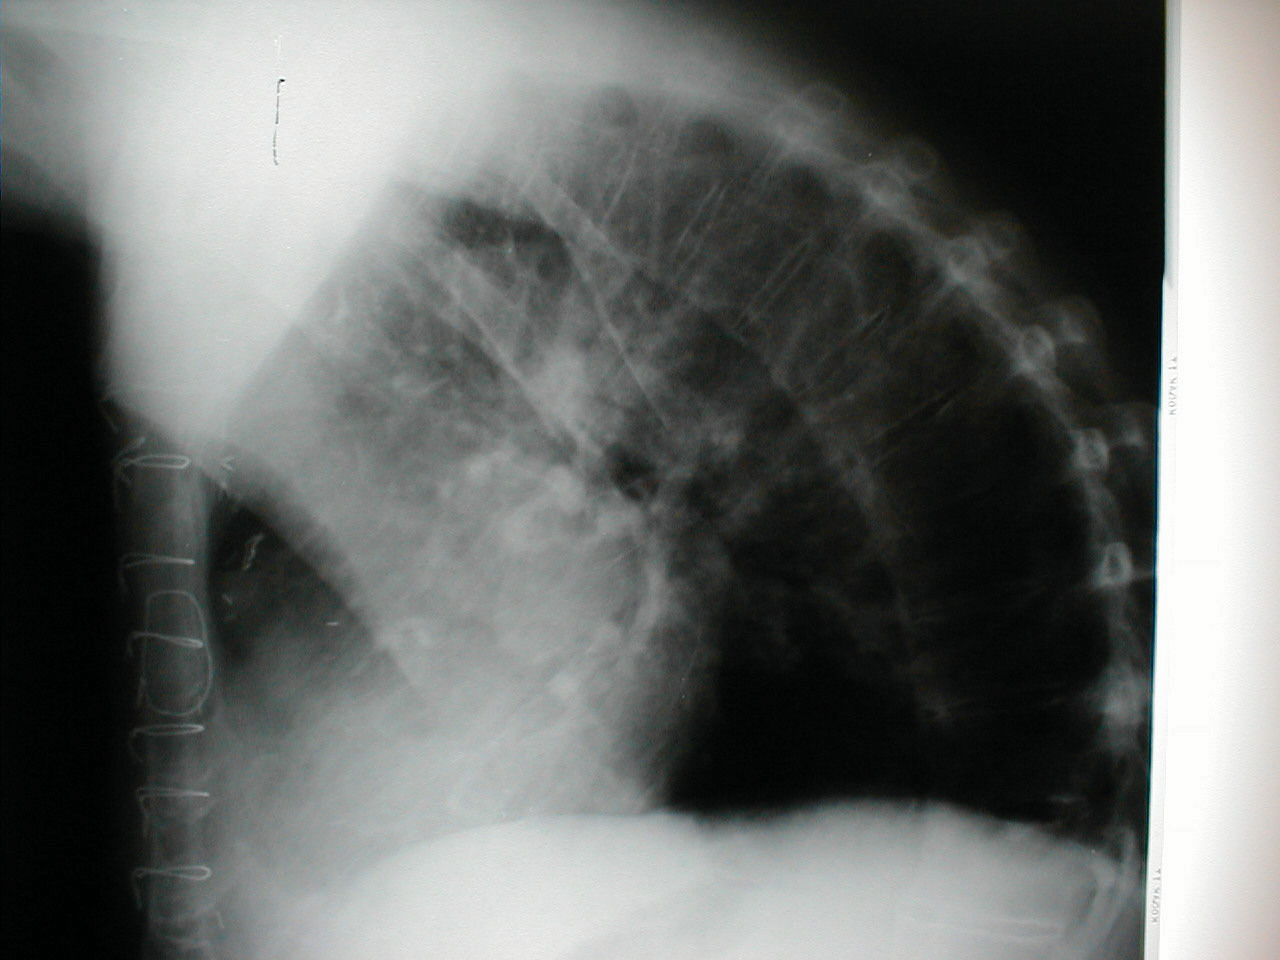 Accompanying X-Ray of same patient clearly demonstrates extreme curvature of the spine.